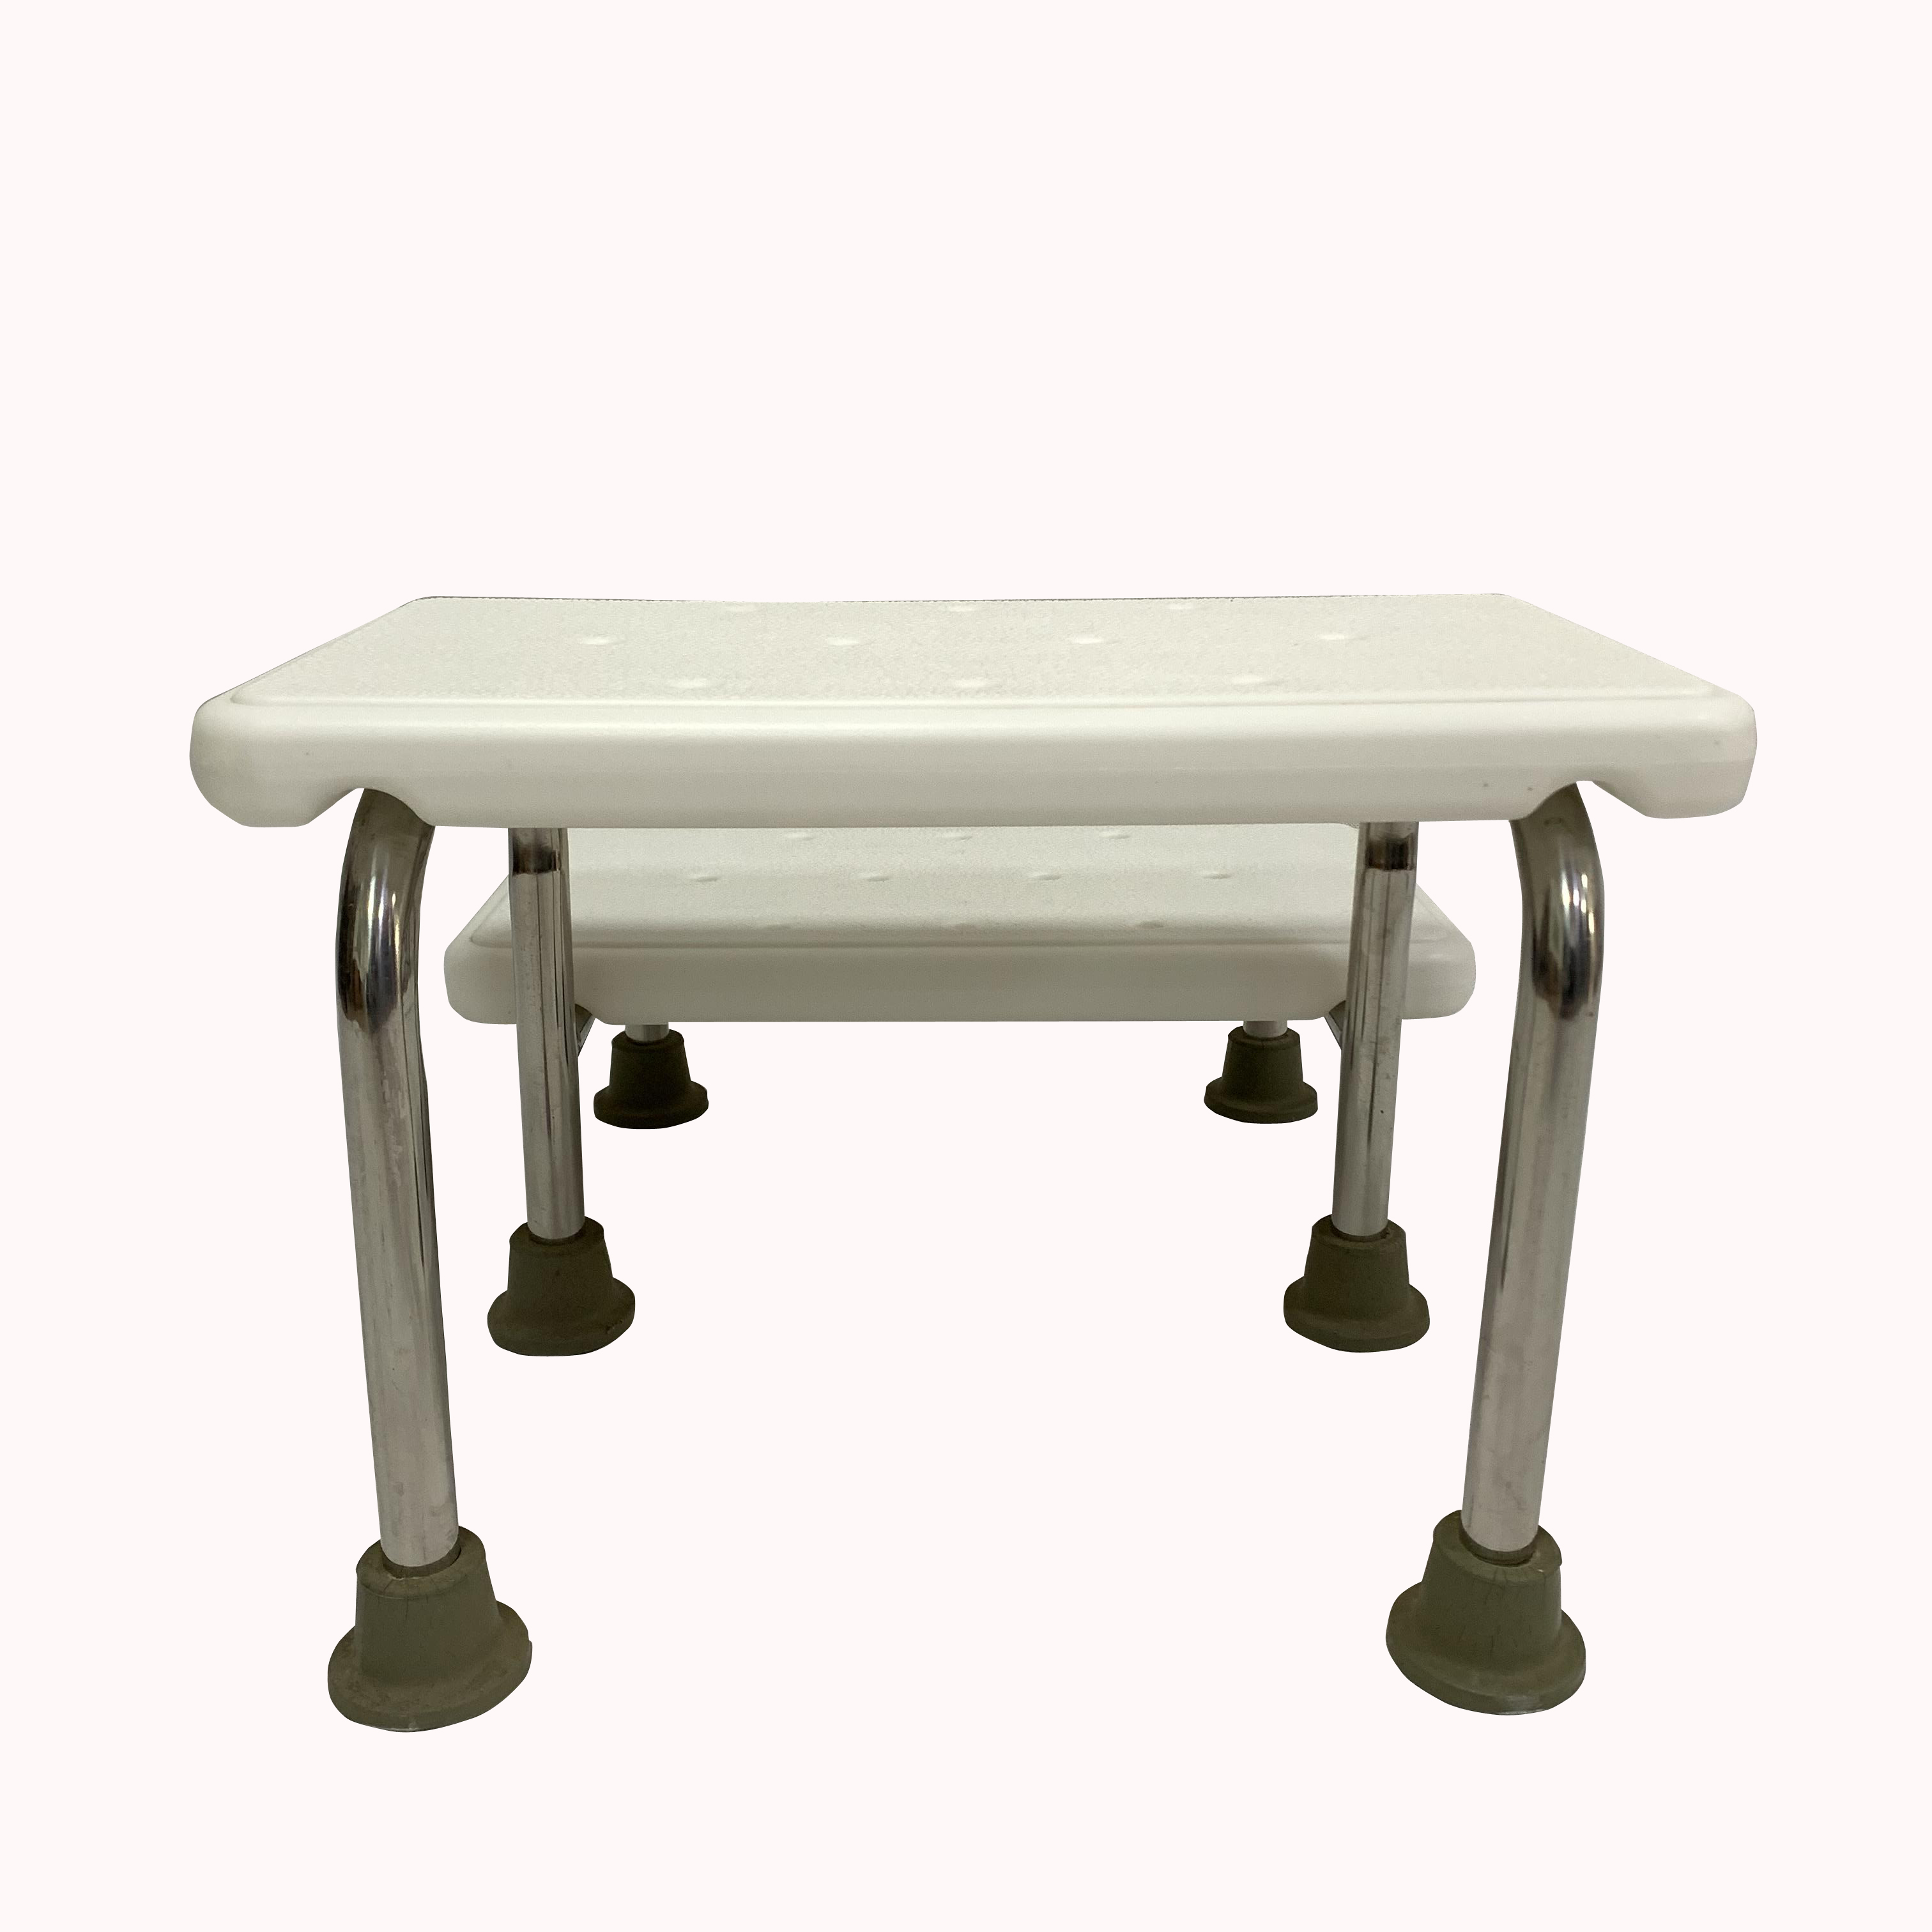 Stainless Steel Two-step Stool for Bathroom Anti-slip and Sturdy